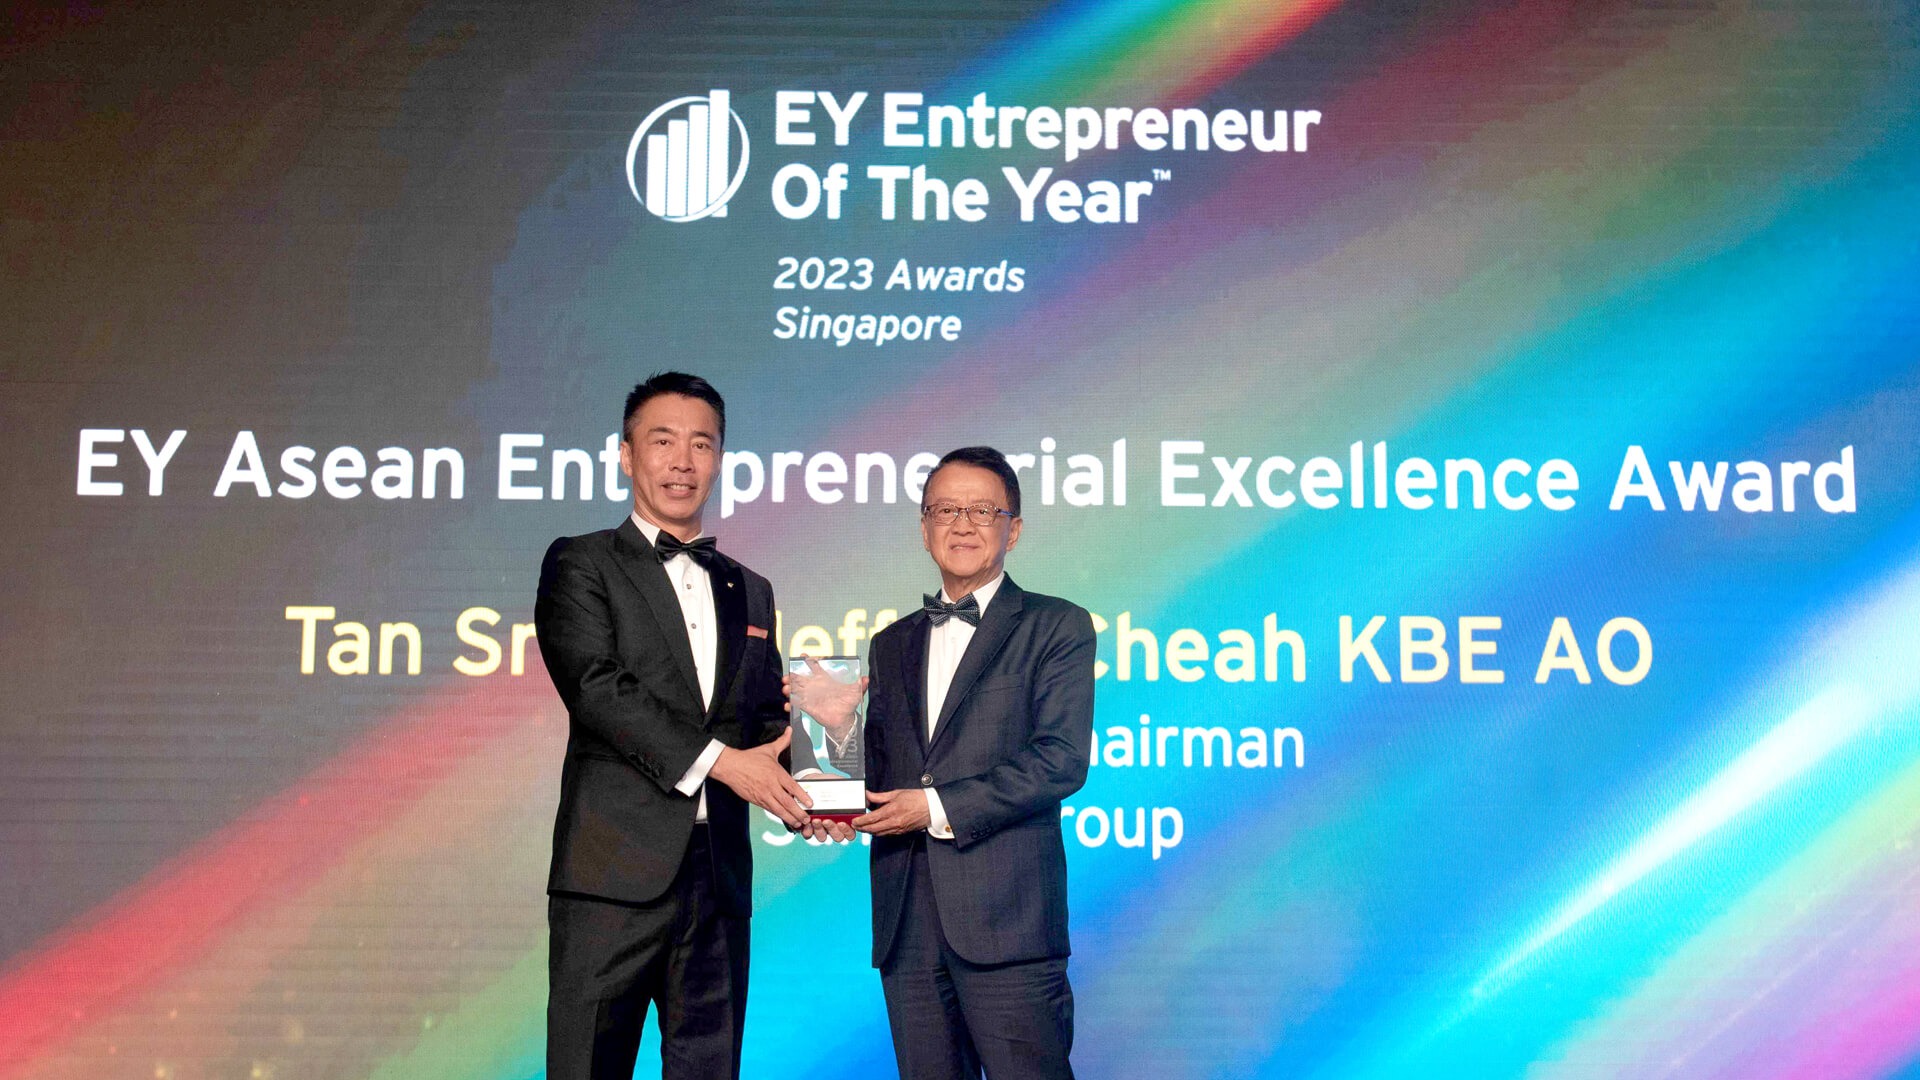 Sunway Group founder and chairman Tan Sri Dato' Seri Sir Jeffrey Cheah KBE AO has been named winner of this year’s EY ASEAN Entrepreneurial Excellence Award, which recognises successful Southeast Asian businesses that contribute to the economy and community in the region.